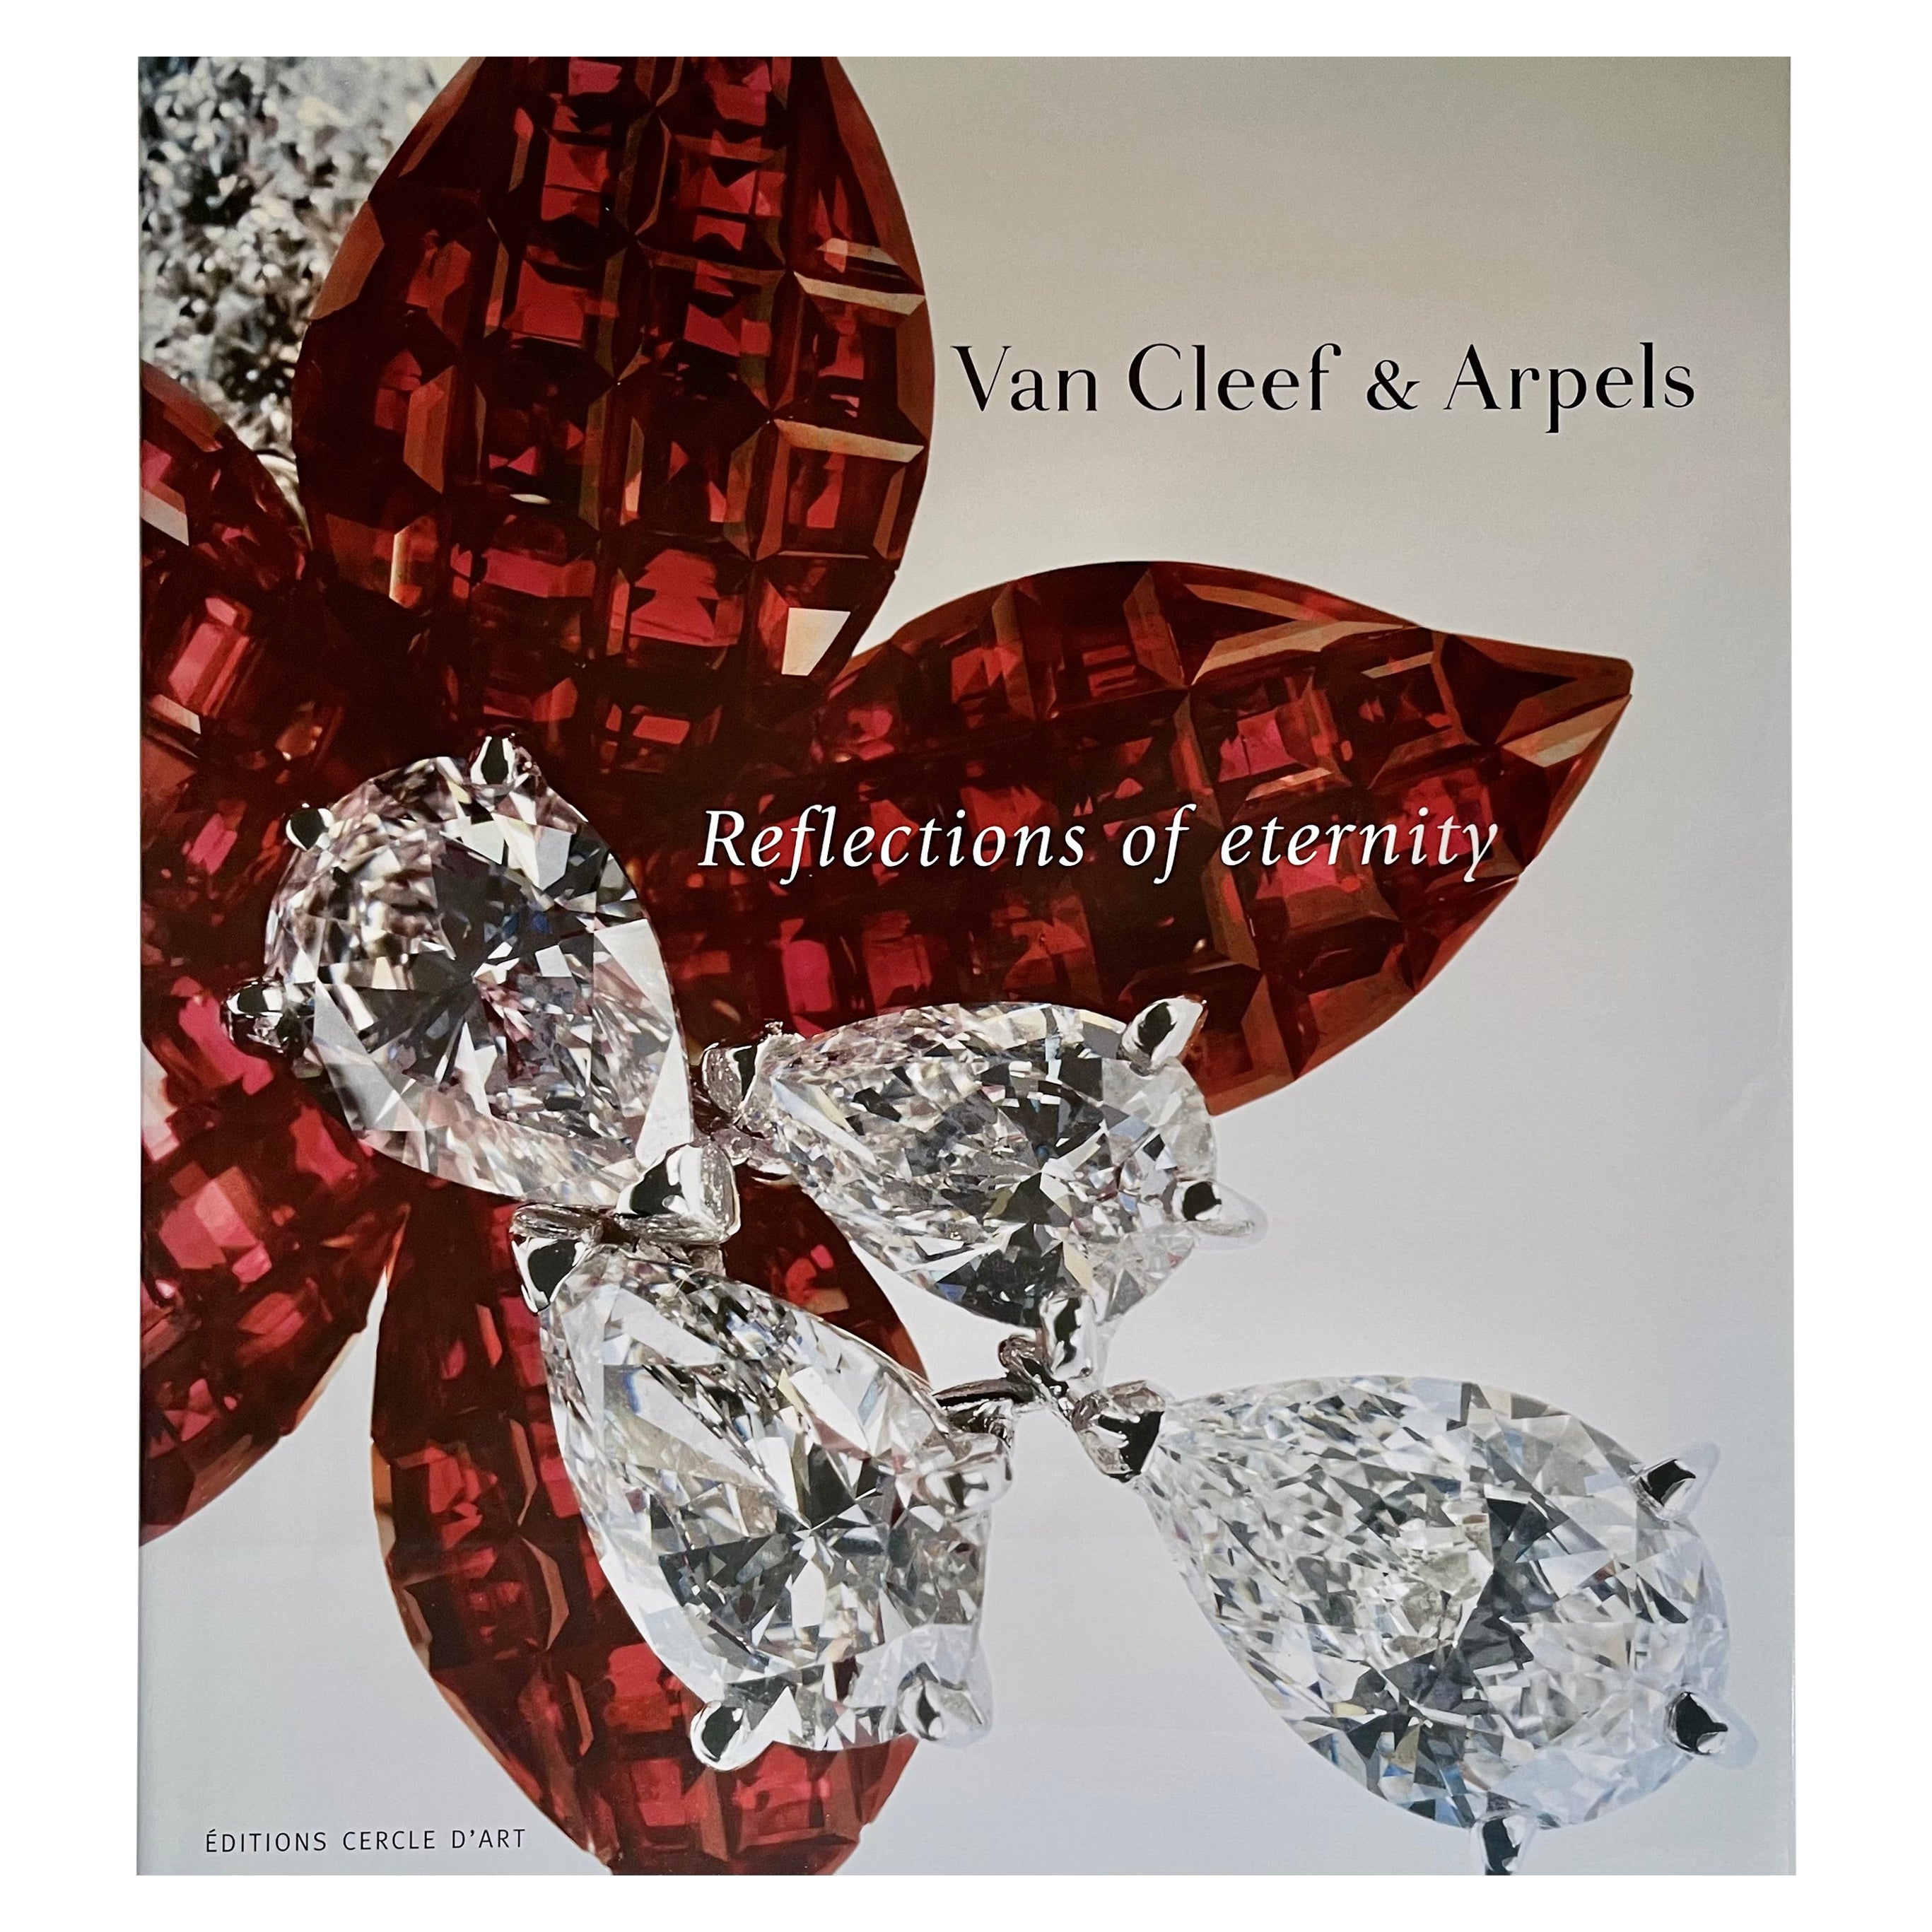 Van Cleef & Arpels Reflections of Eternity 1st Edition 2006 For Sale